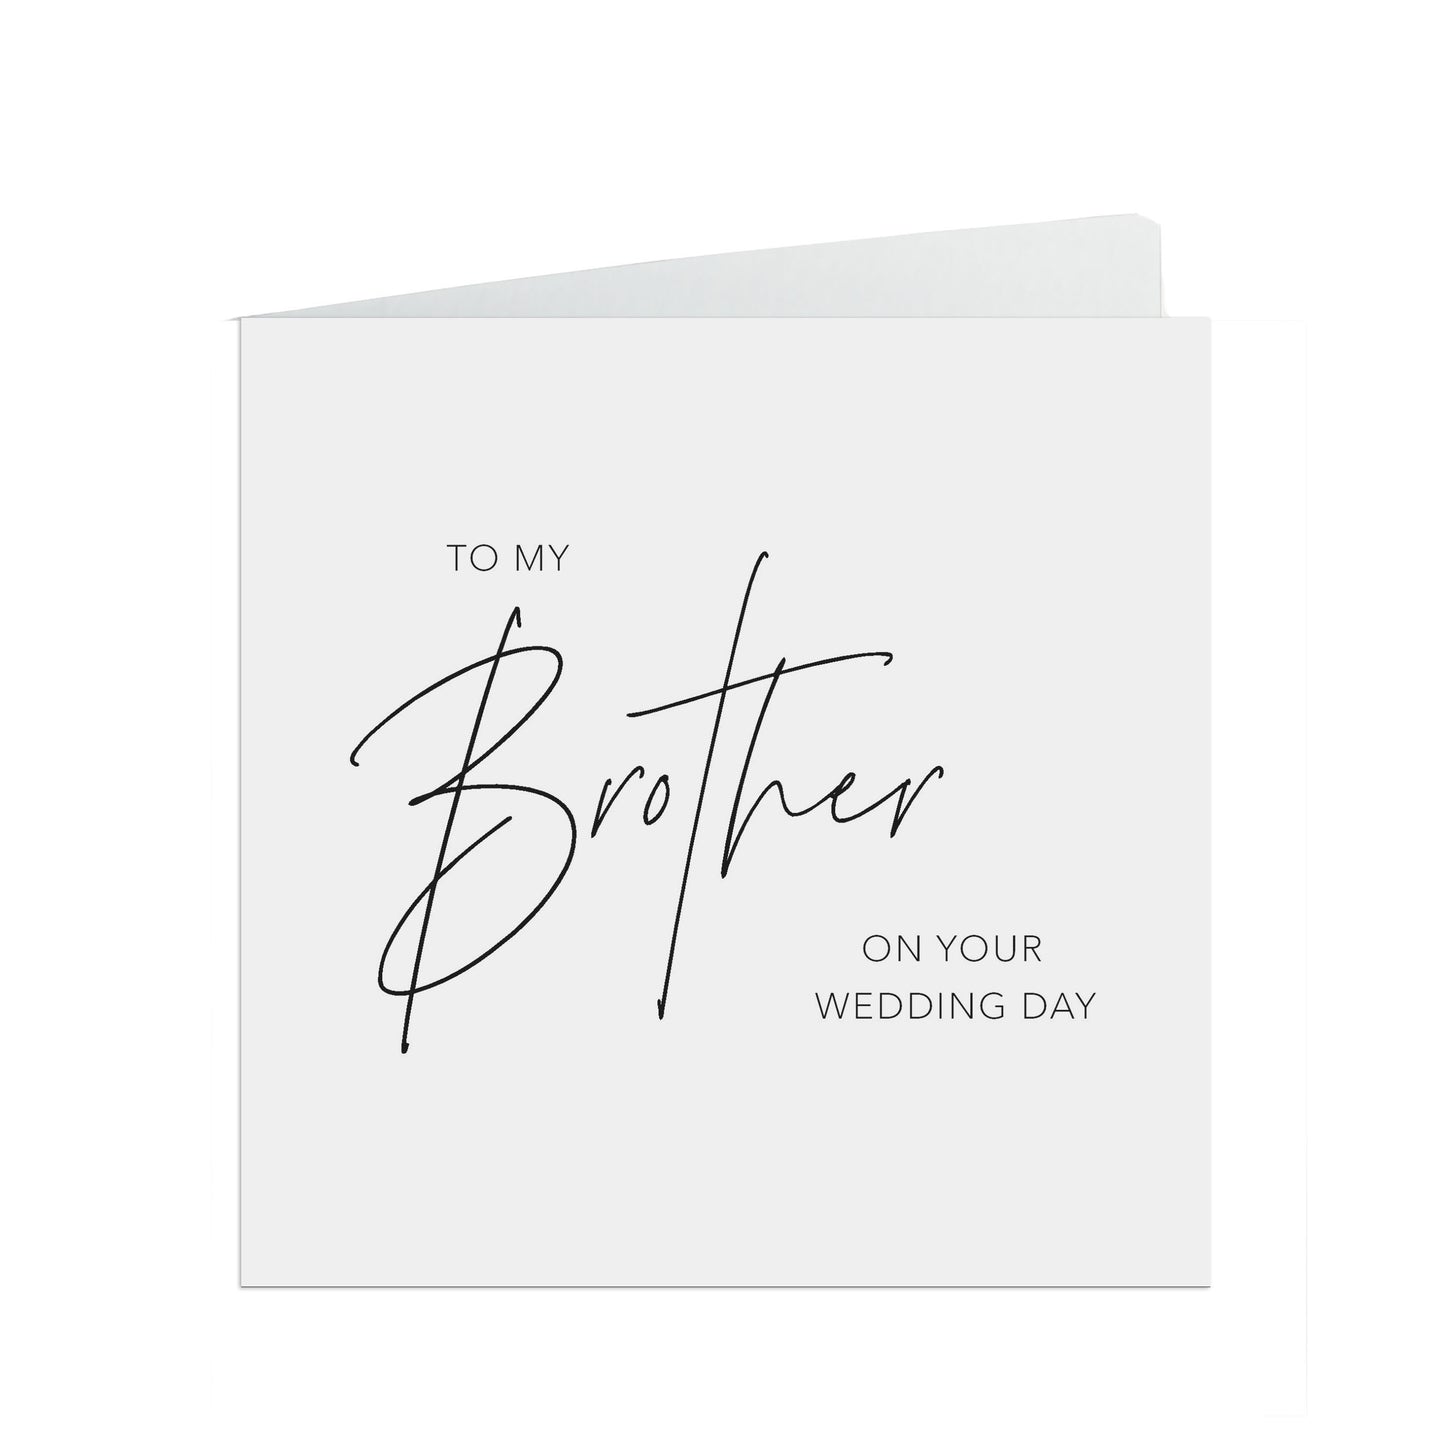 Brother On Your Wedding Day Card, Elegant Black & White Design, 6x6 Inches In Size With A White Envelope.